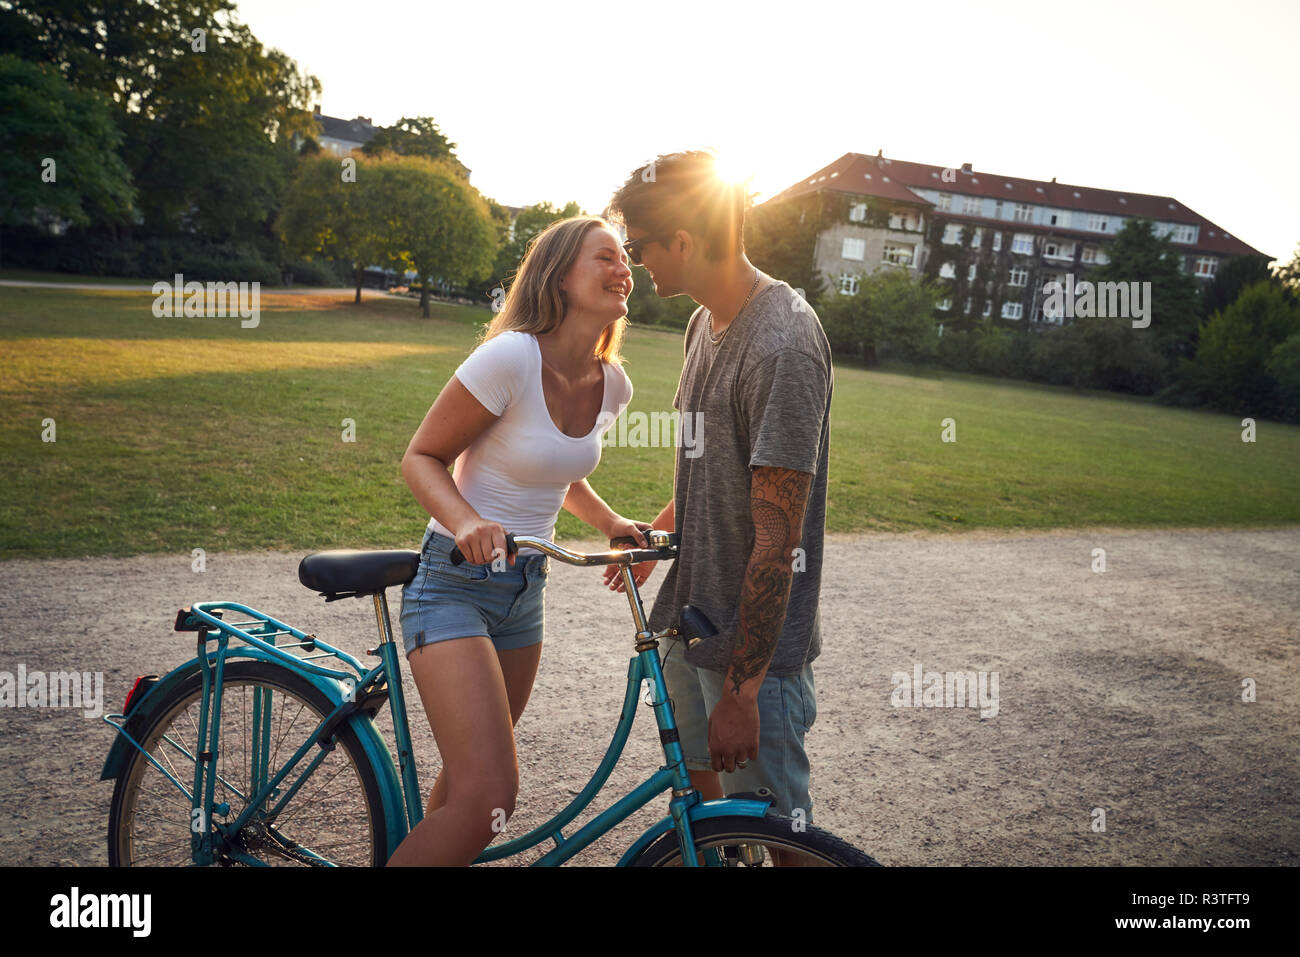 Young woman with bicycle, kissing her boyfriend in park Stock Photo